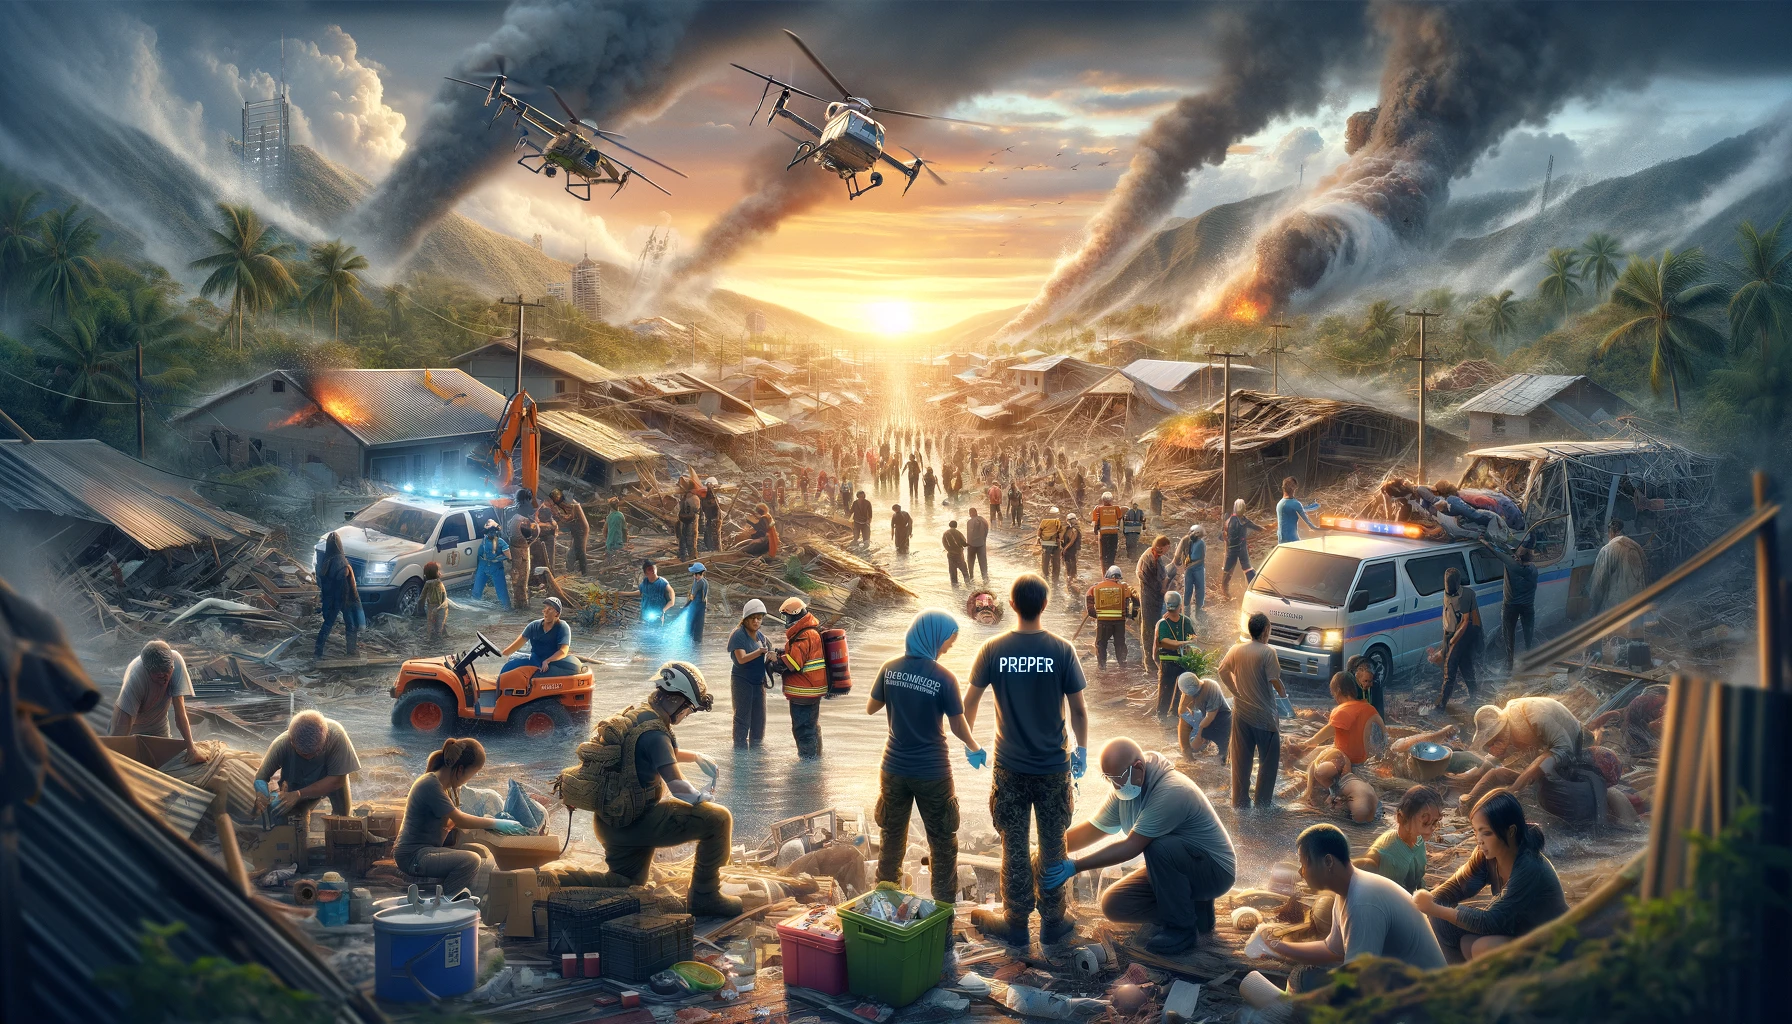 Powerful depiction of disaster recovery and assistance, showing volunteers and professionals from various groups engaged in post-disaster efforts, like clearing debris and rebuilding homes, with community members sharing resources. The scene uses advanced technology, such as drones for assessment and construction equipment for rebuilding, set against the aftermath of hurricanes and earthquakes. The image radiates hope and resilience, celebrating the collective spirit of communities and the critical role of preparedness and technology in overcoming adversity